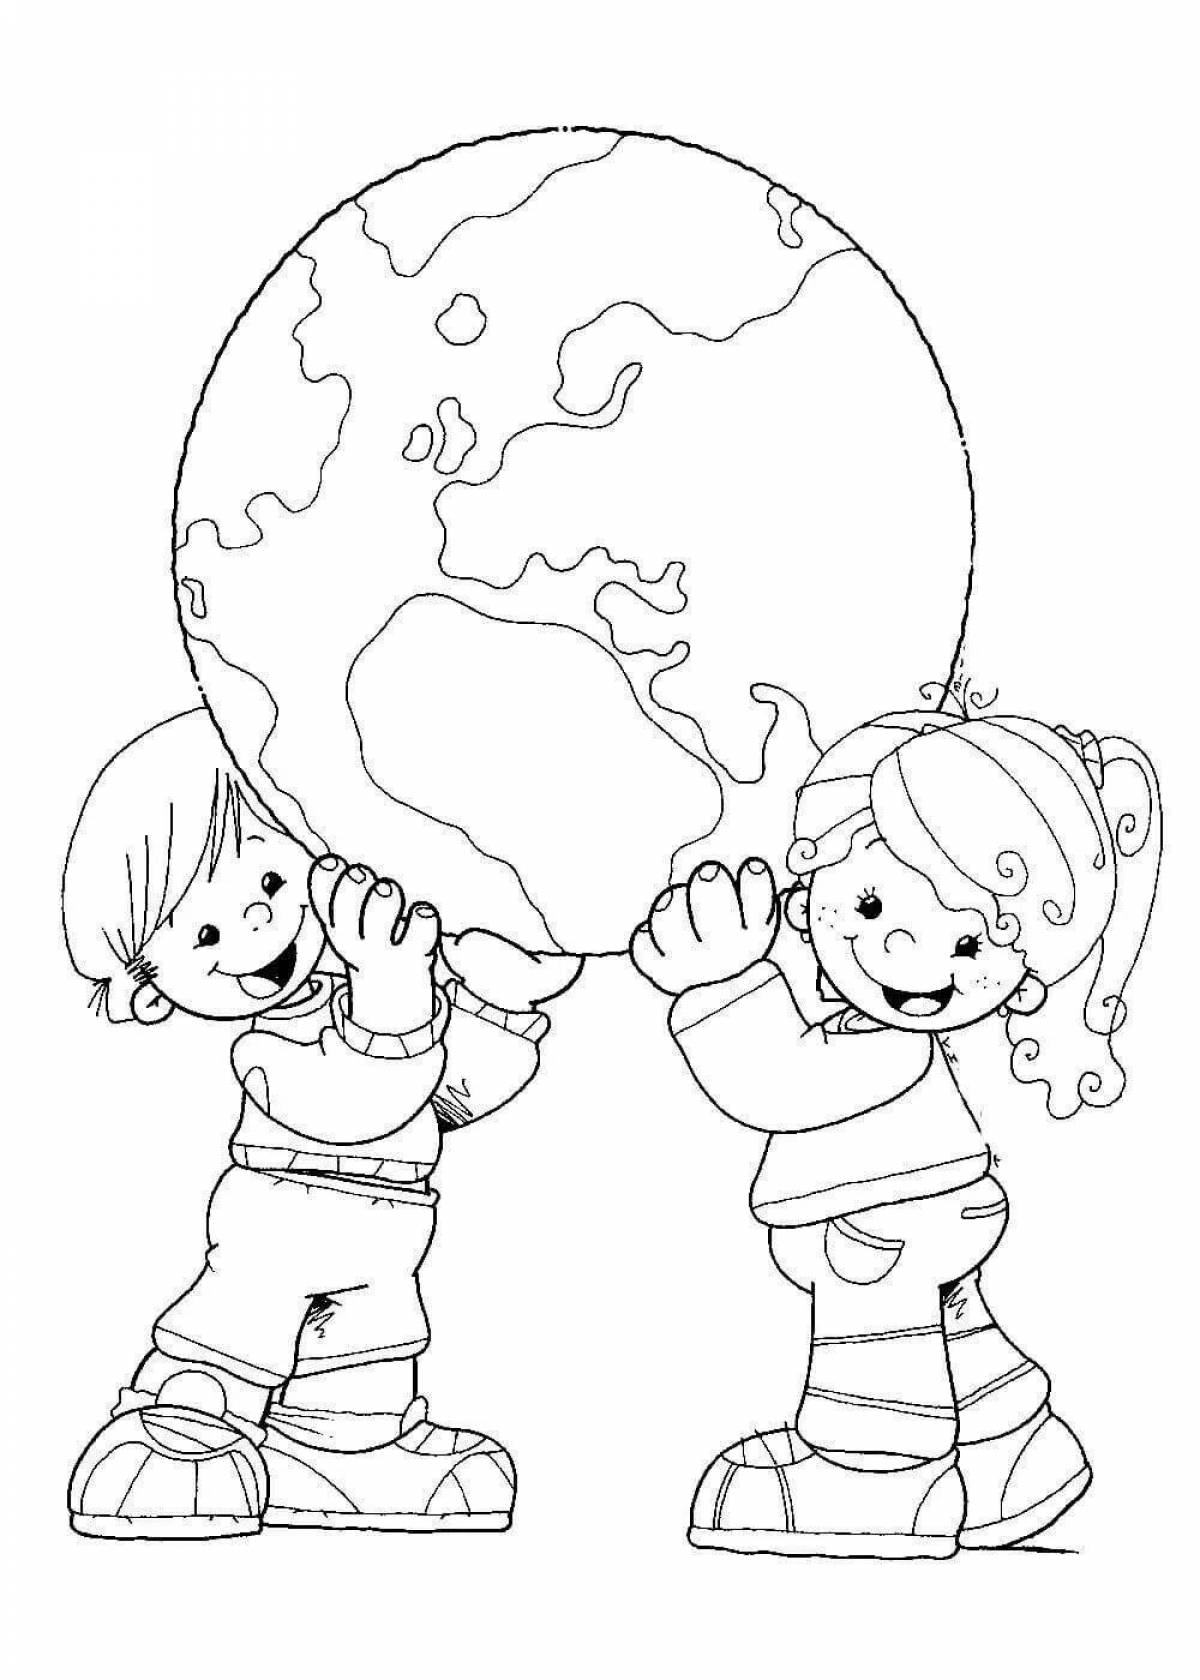 Glorious world without war coloring book for kids